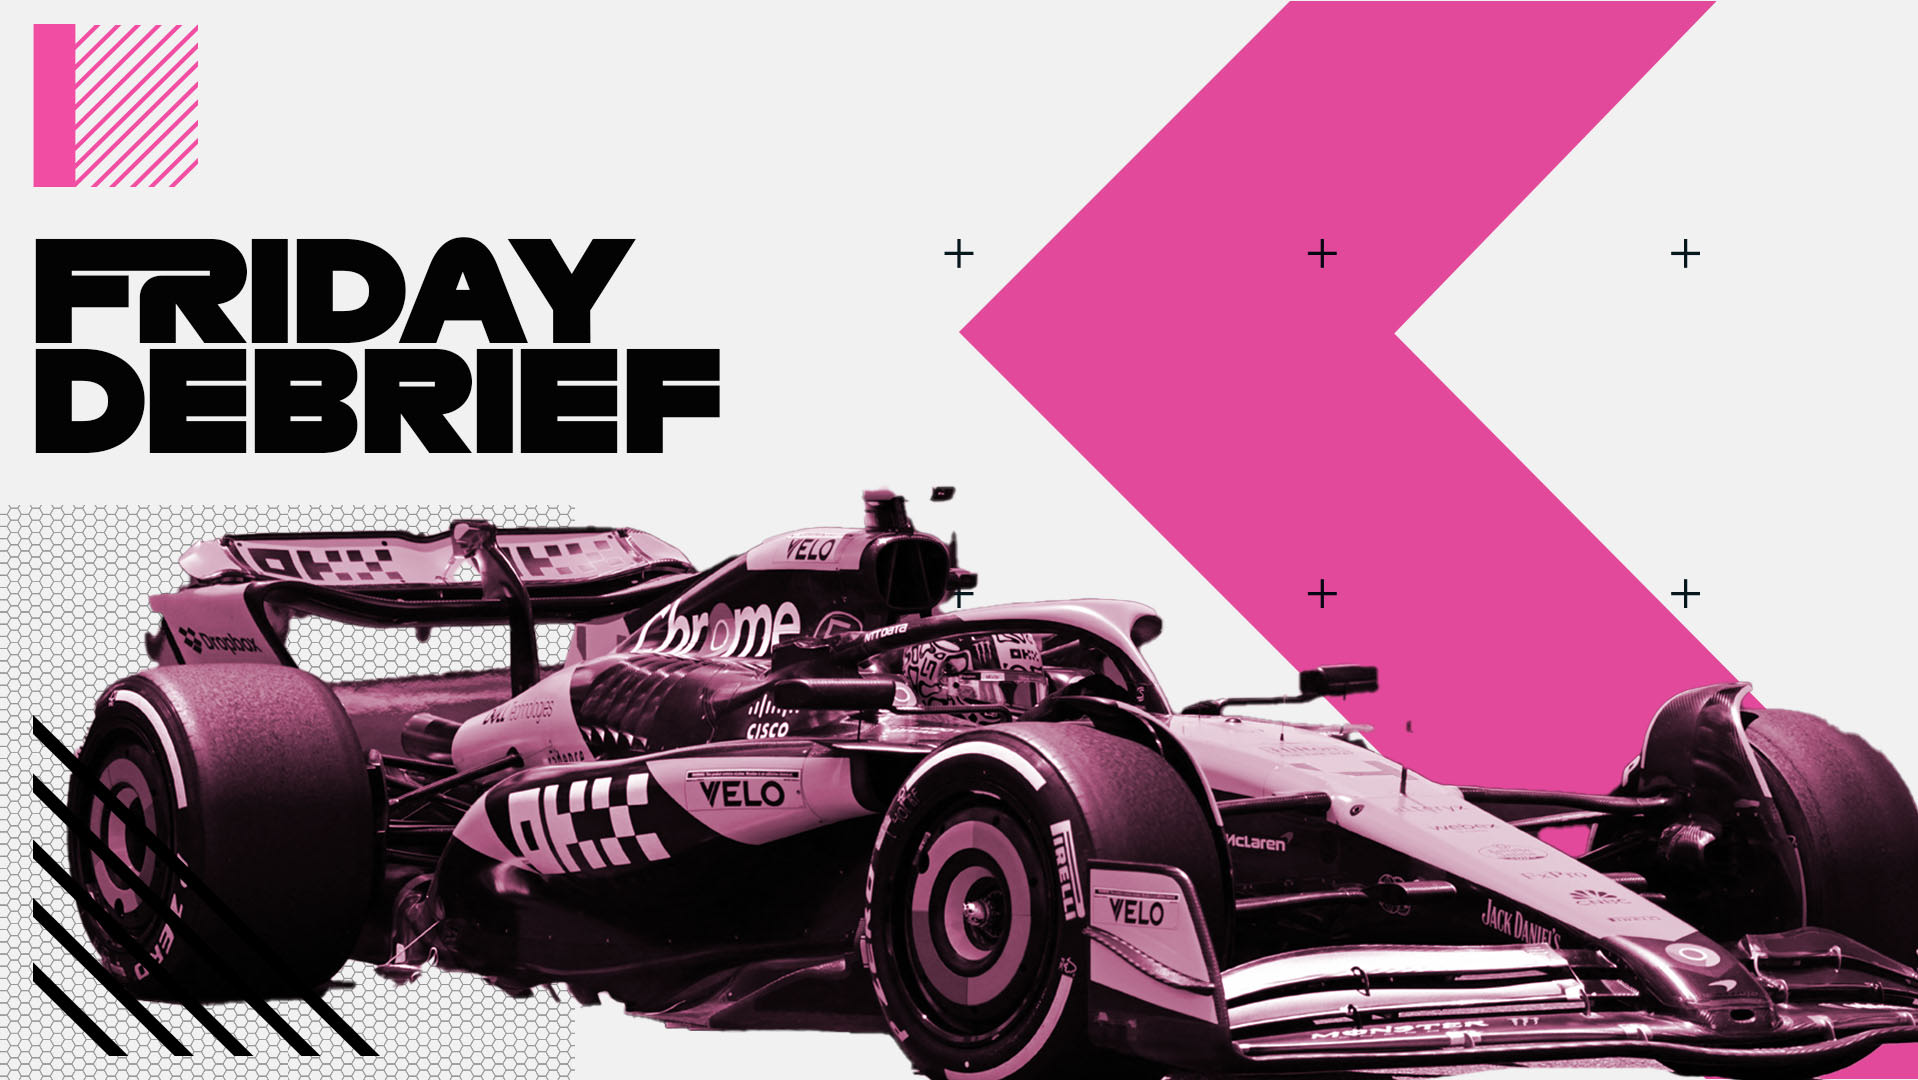 FRIDAY DEBRIEF: Why Red Bull look like they’re facing some stiff competition in the Miami heat